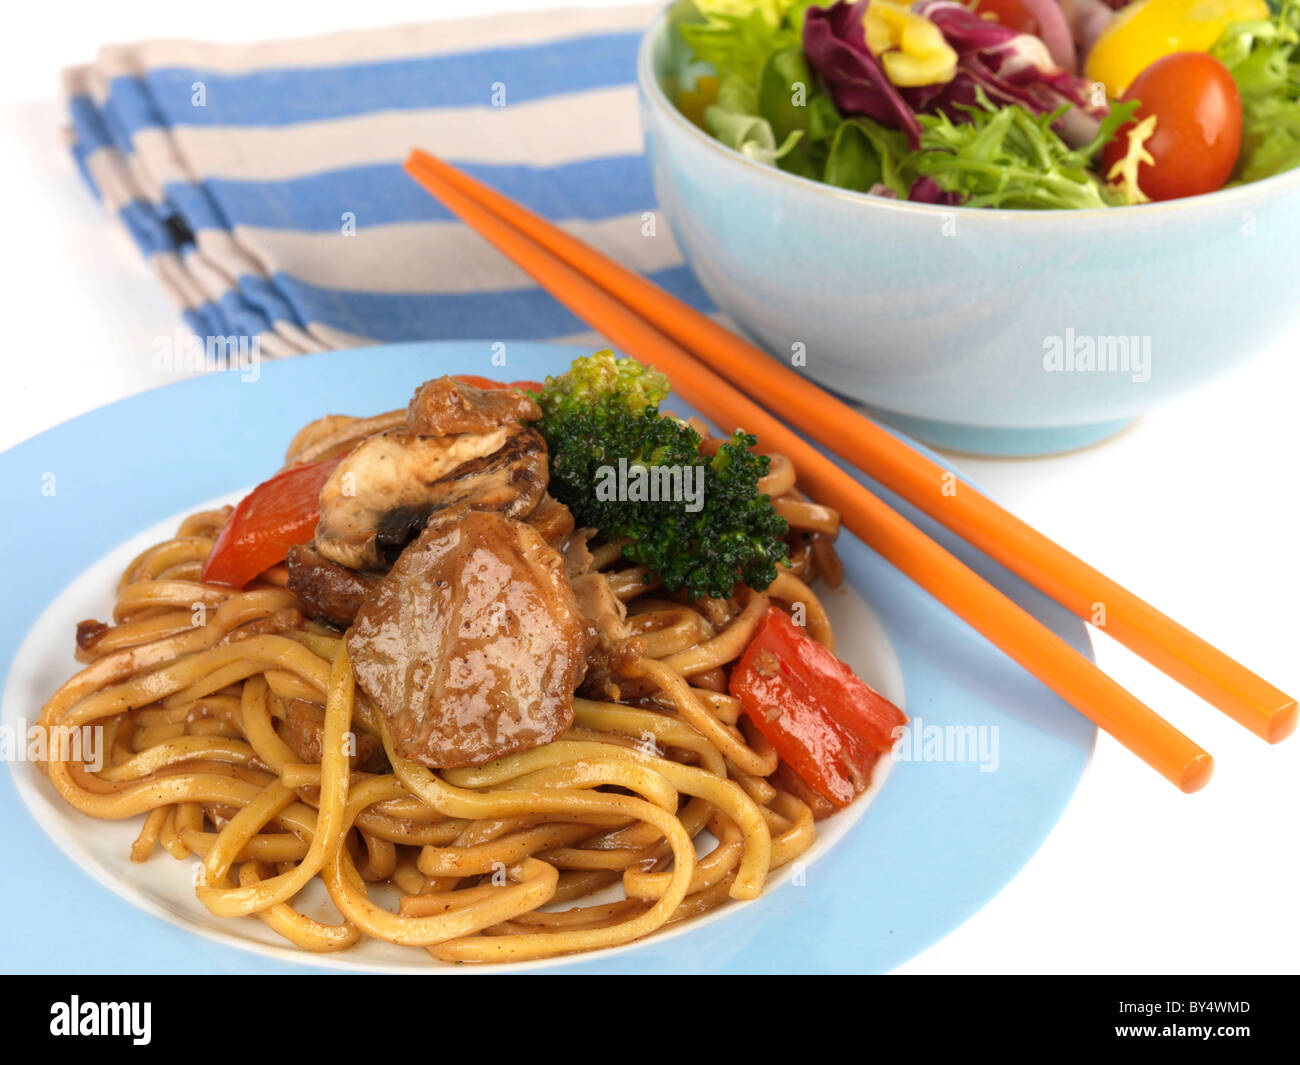 Freshly Cooked Stir Fried Chinese Char Sui Pork With Noodles Against A White Background With No People Stock Photo